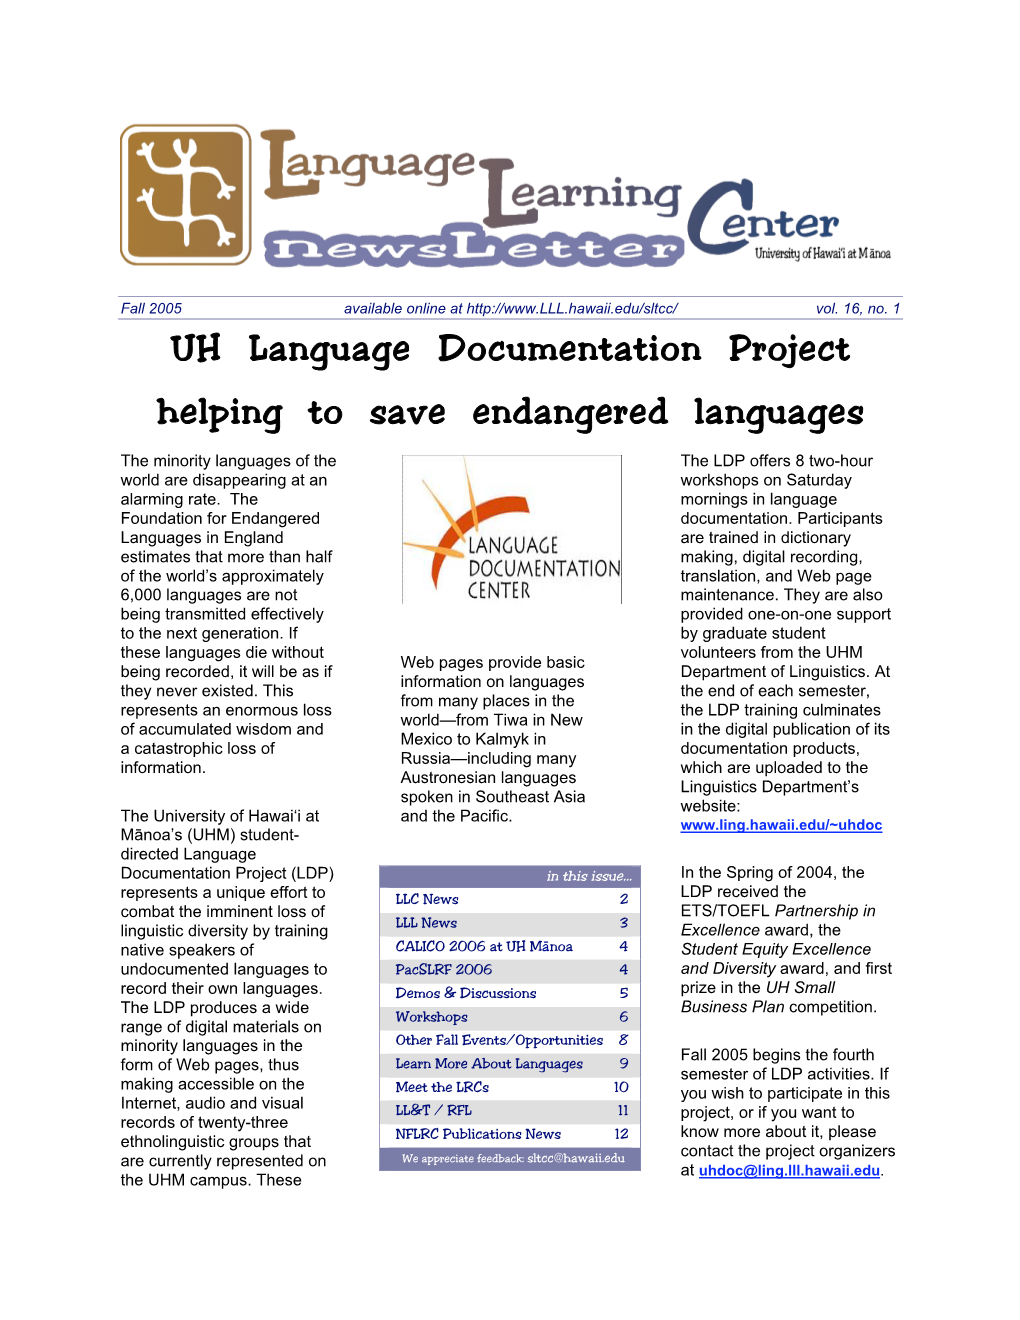 UH Language Documentation Project Helping to Save Endangered